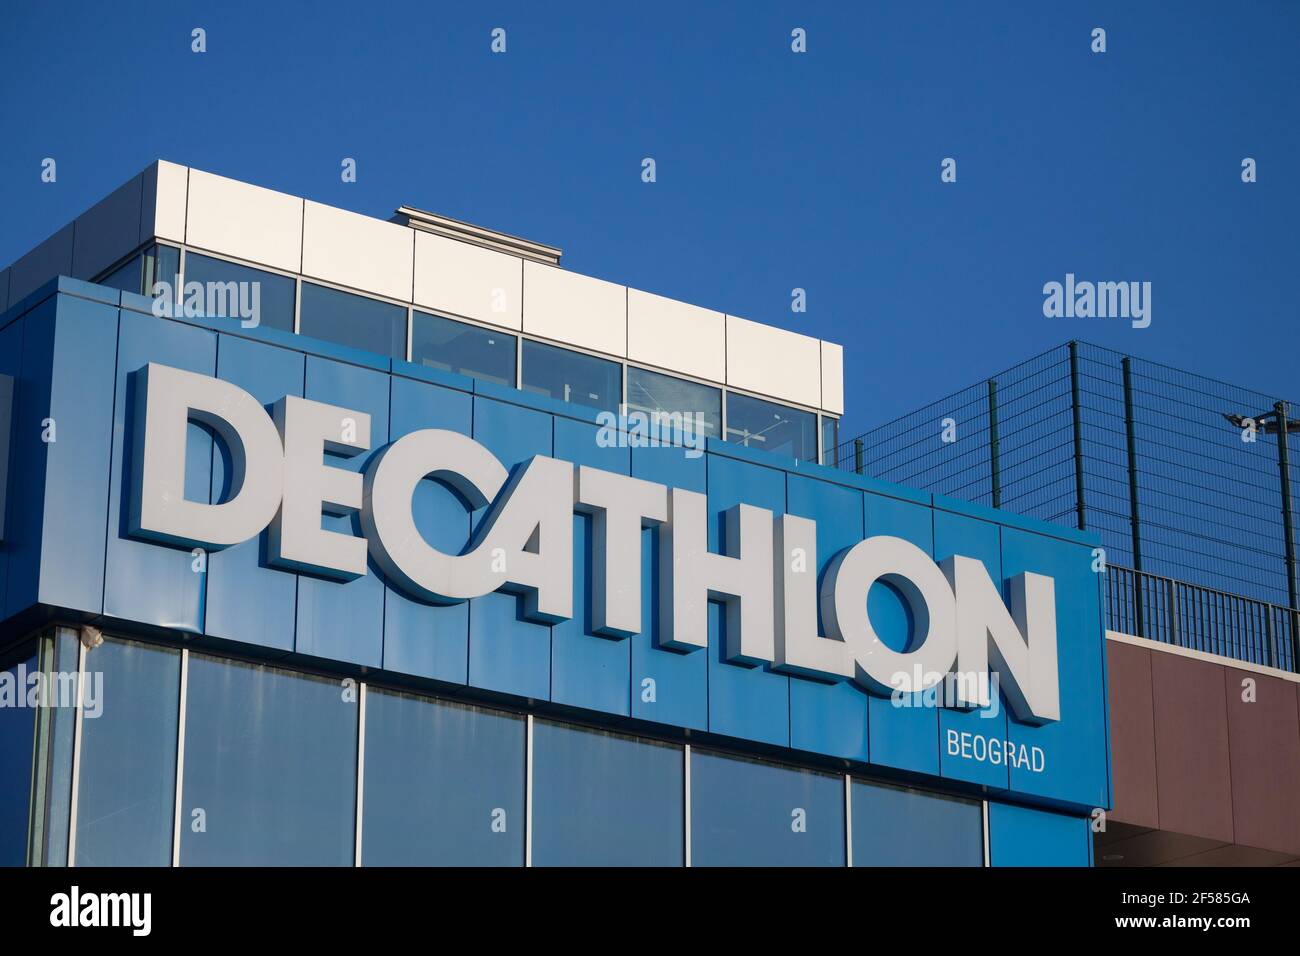 Inside the U.S.'s First Large Decathlon Store - Frenchly